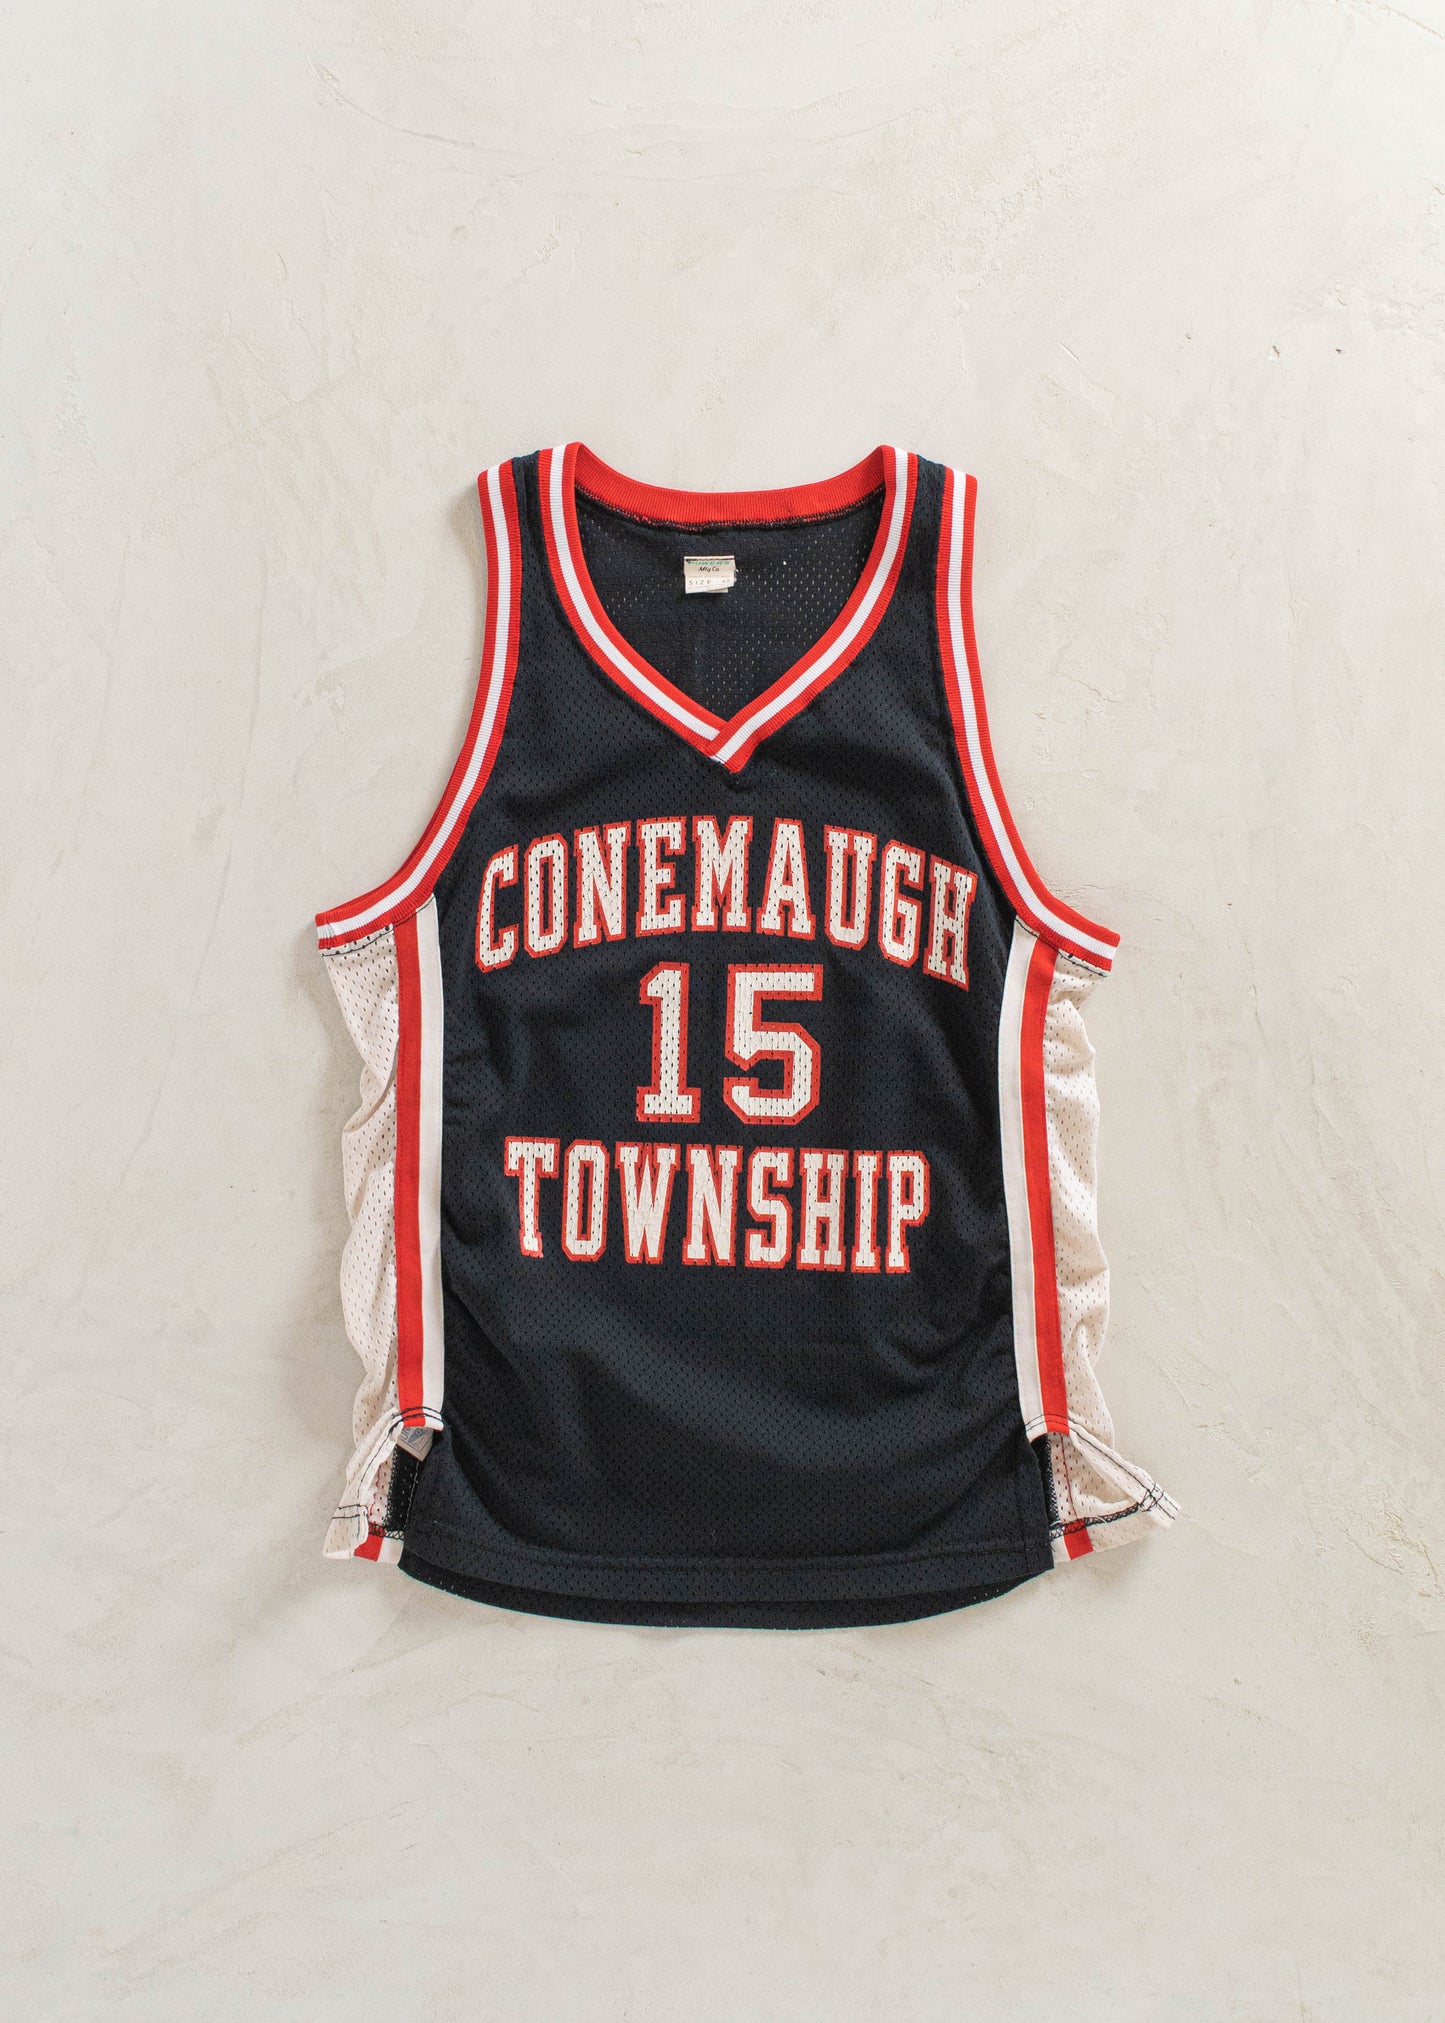 1980s Powers Mfg. Co. Conemaugh Township Mesh Sport Jersey Size L/XL